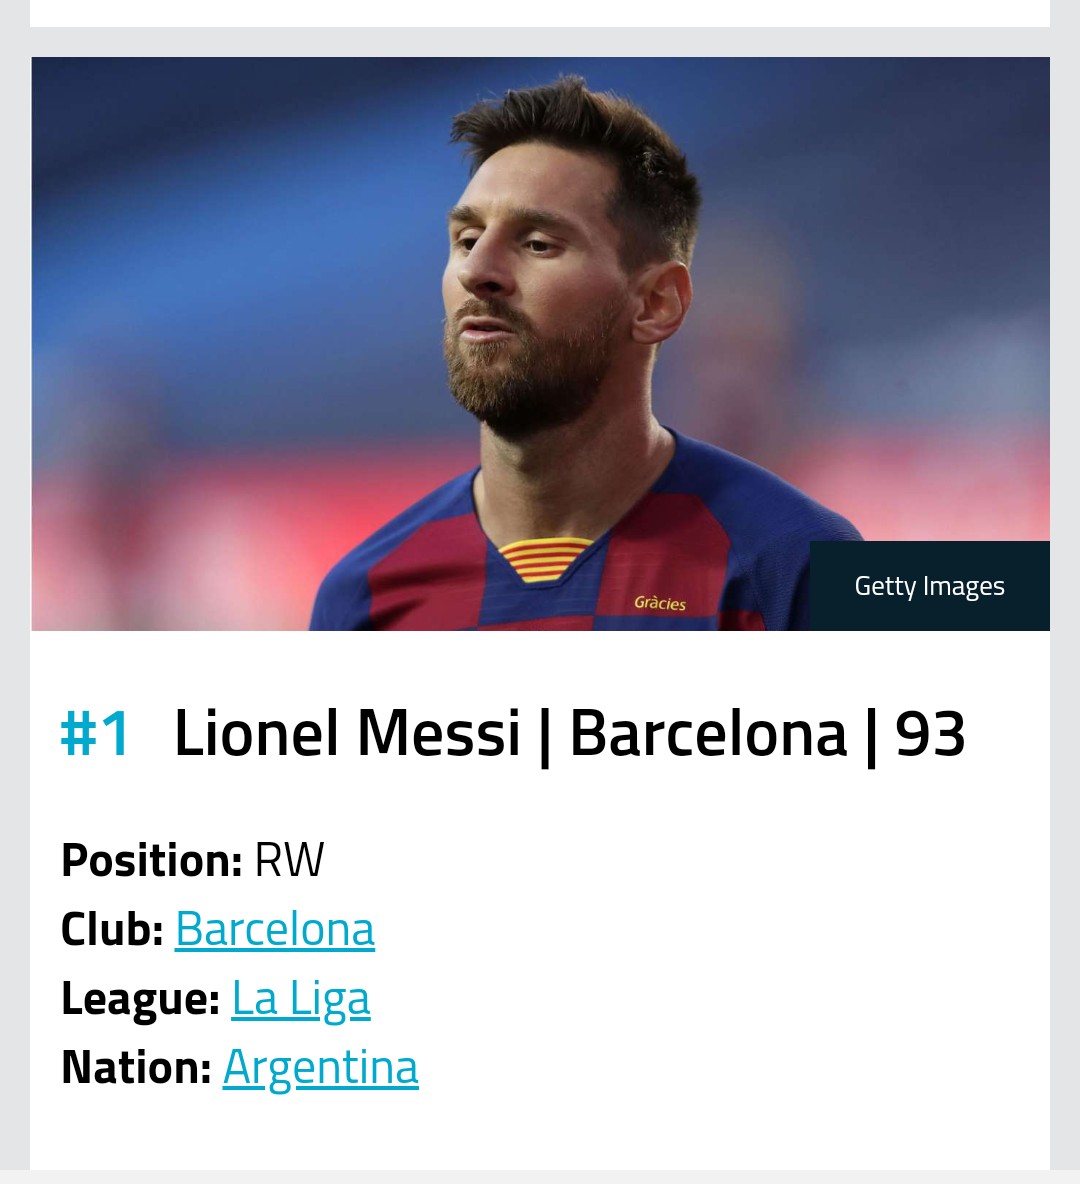 FIFA21 Players Ranking - Messi Ranked No 1 Player On FIFA21